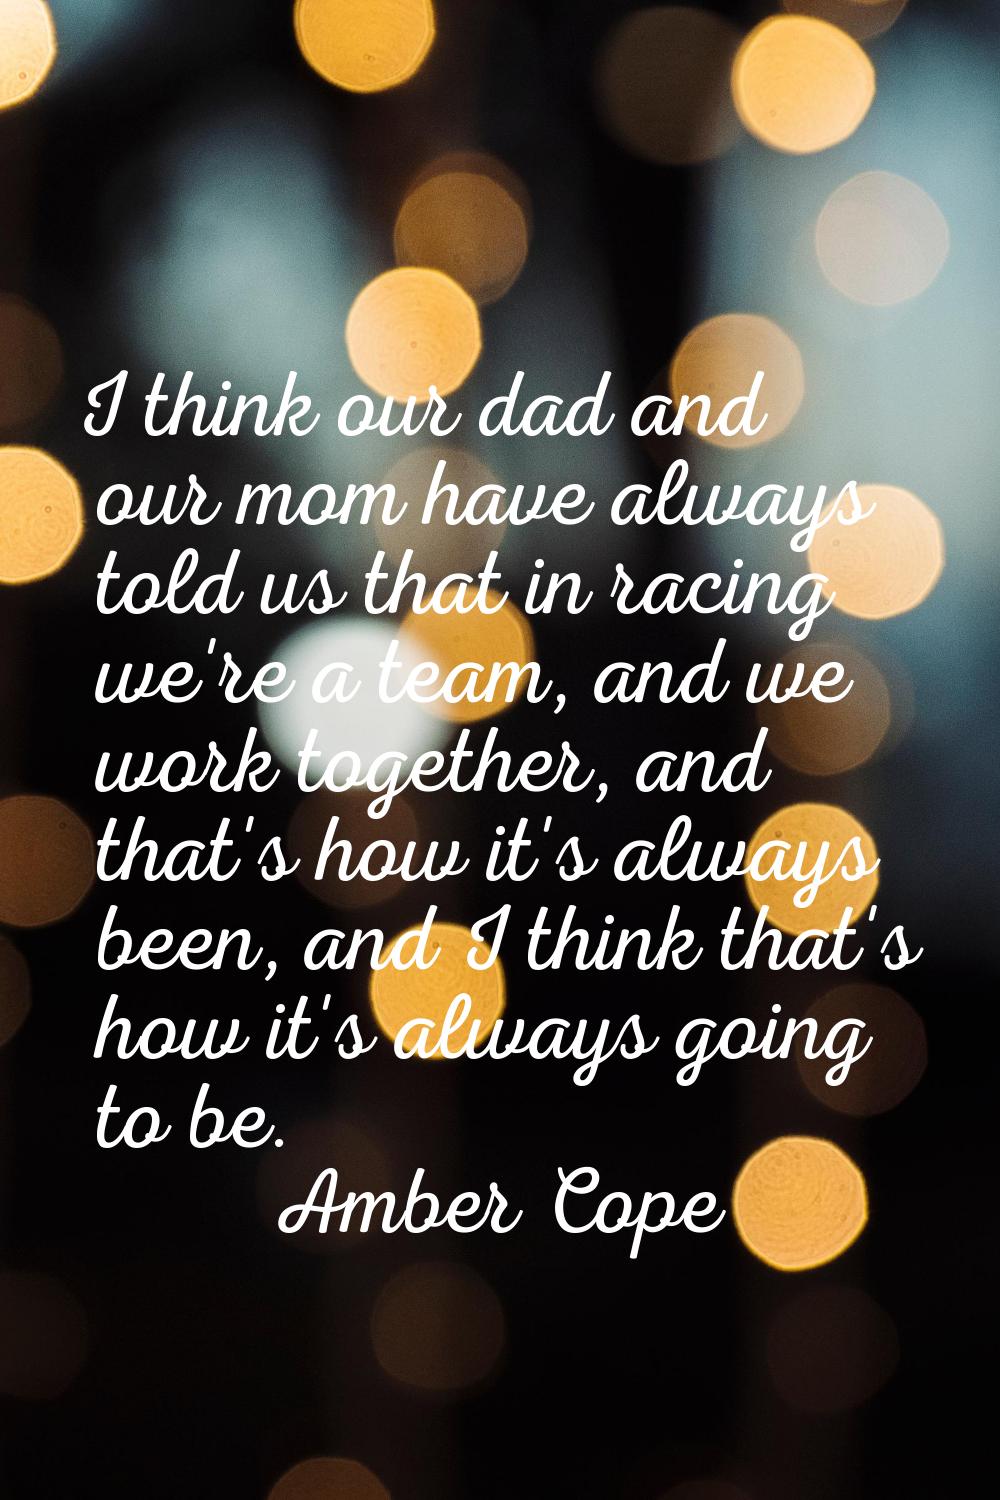 I think our dad and our mom have always told us that in racing we're a team, and we work together, 